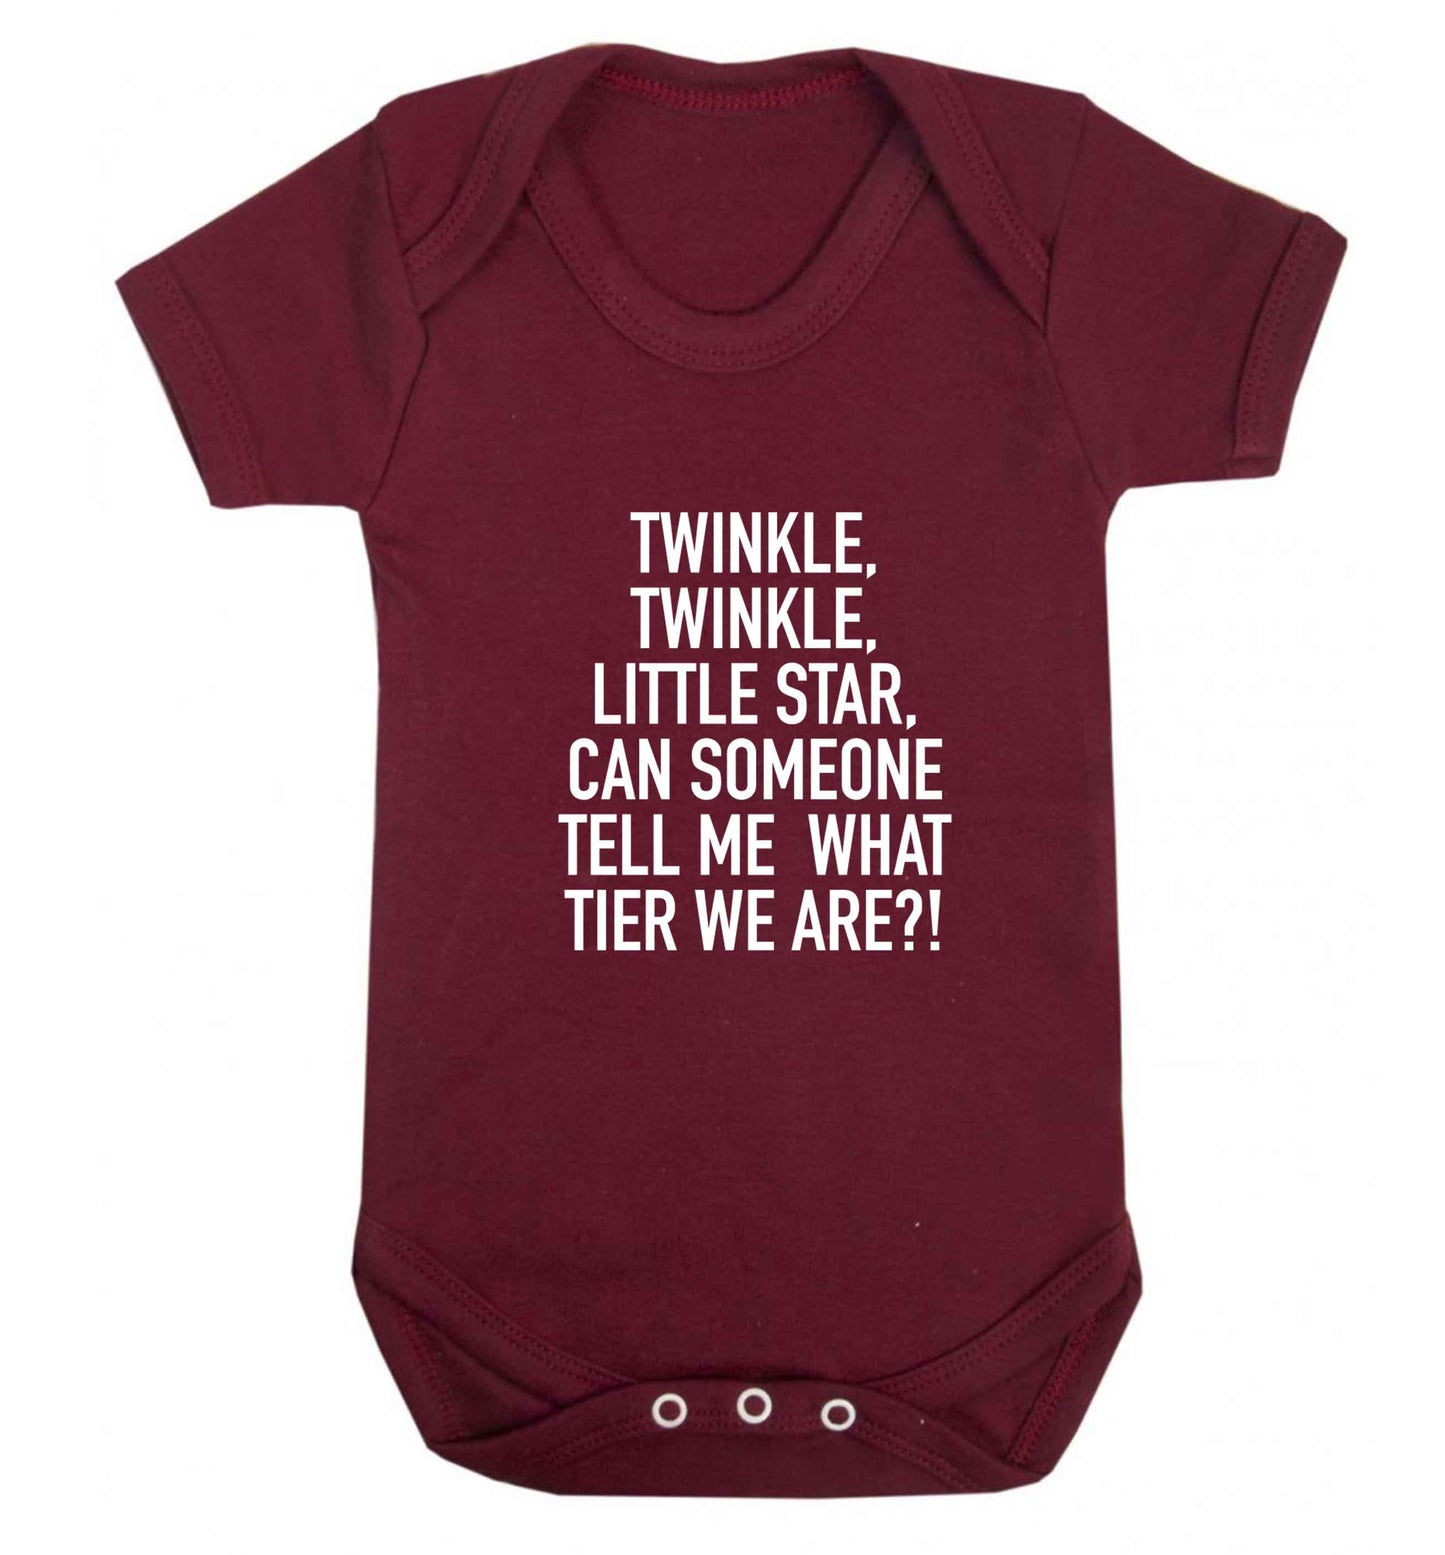 Twinkle twinkle, little star does anyone know what tier we are? baby vest maroon 18-24 months